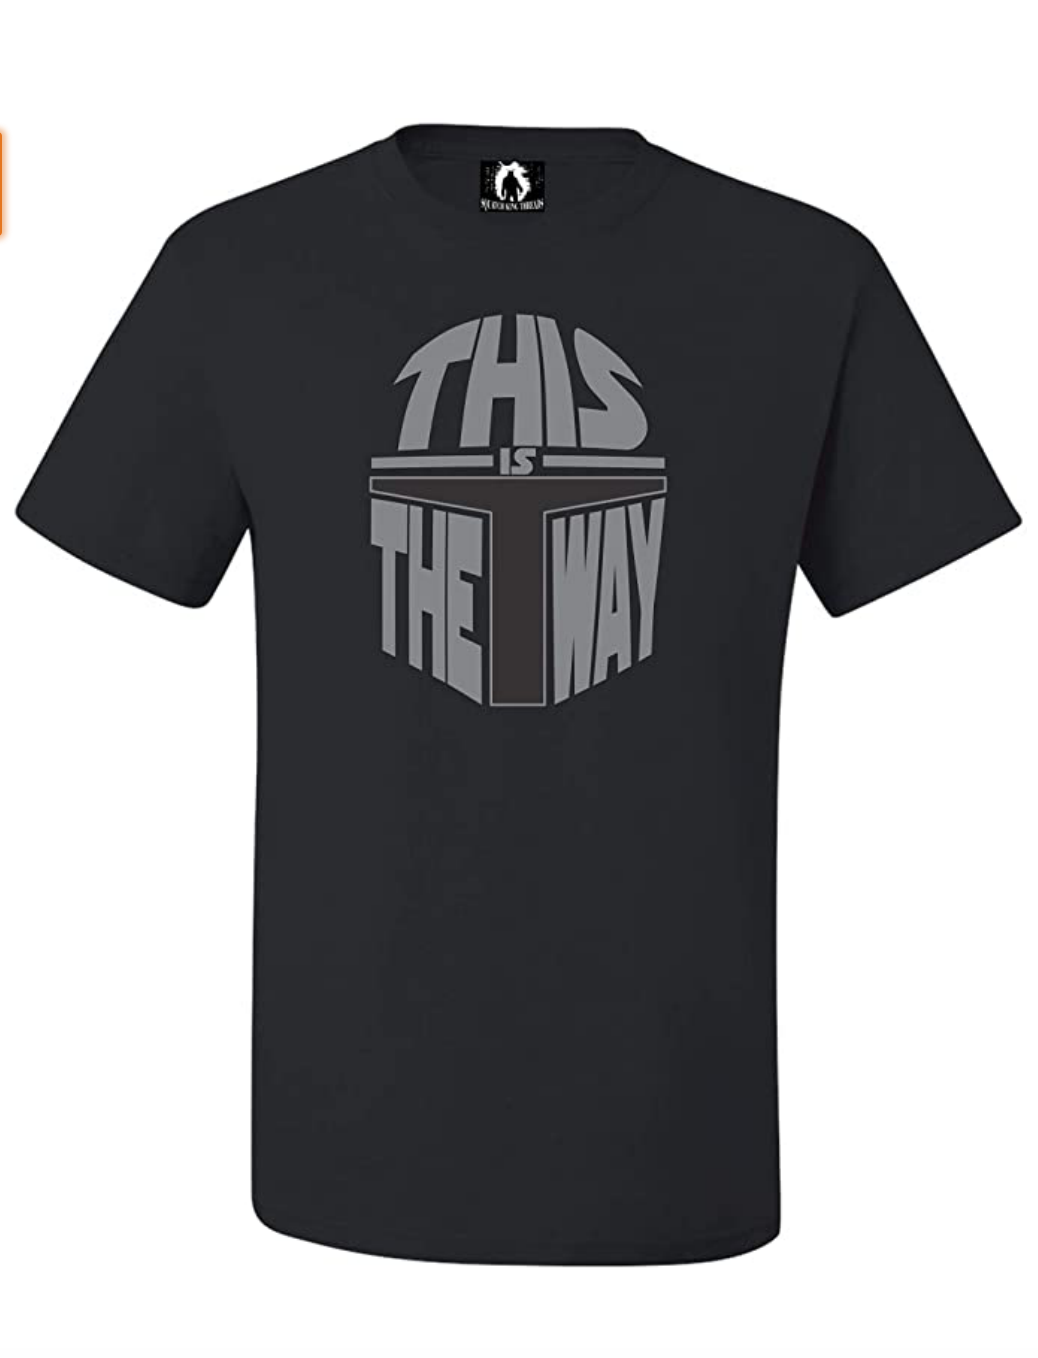 TM "This is The Way" T-Shirt